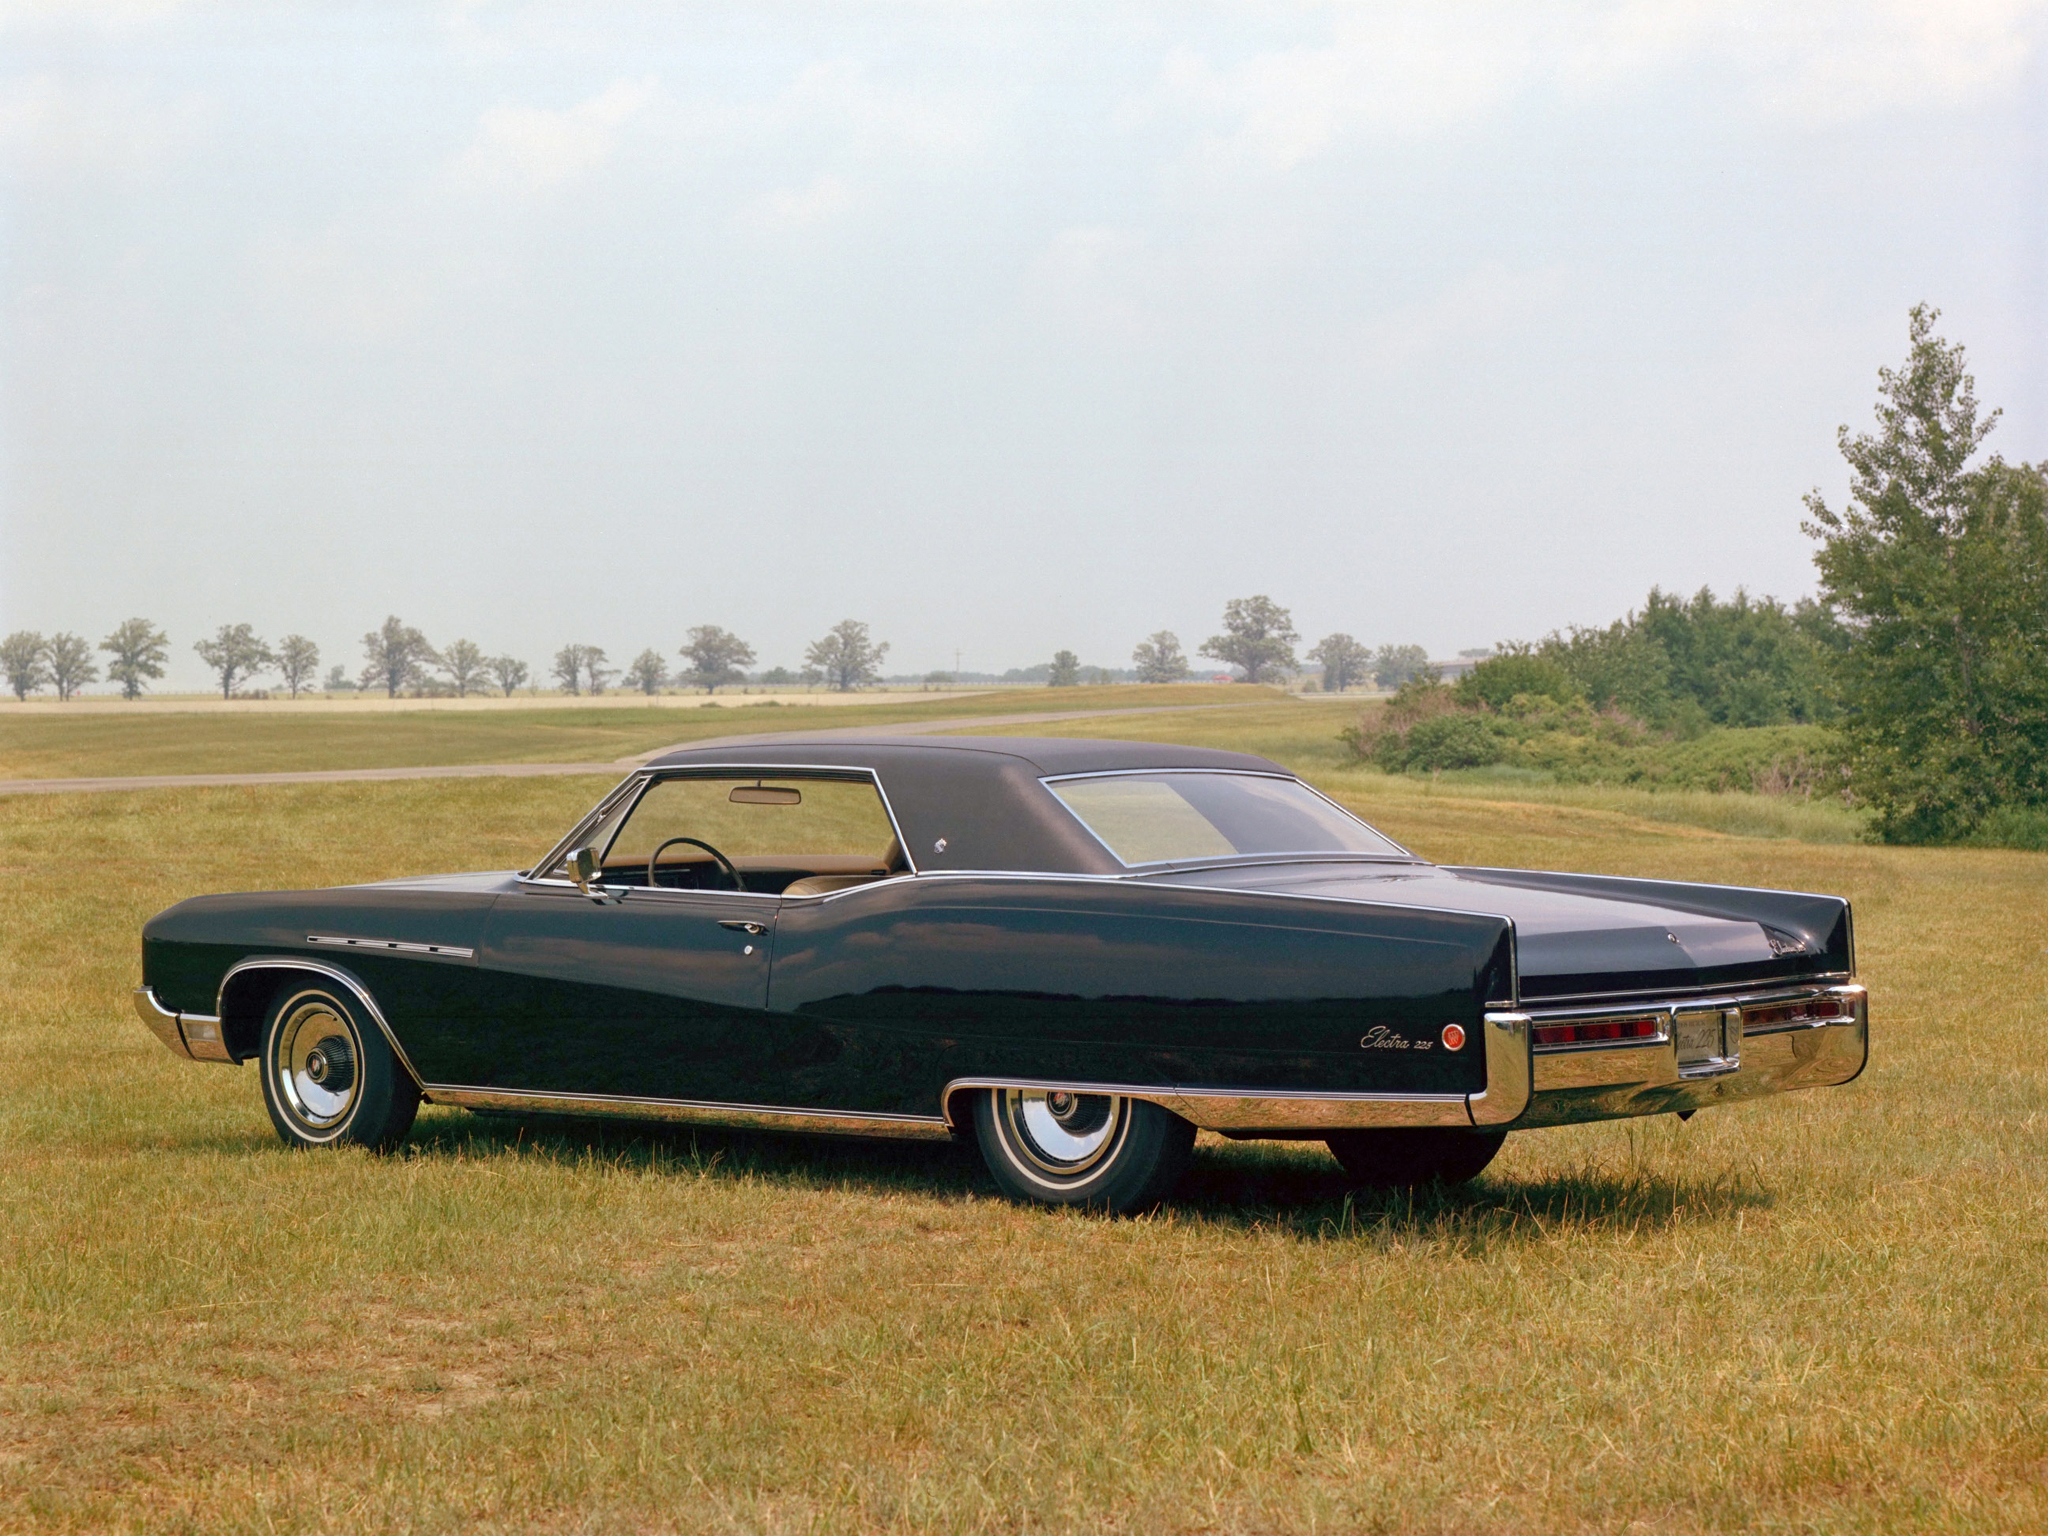 1968, Buick, Electra, 225, Hardtop, Coupe, 48257, Classic Wallpaper